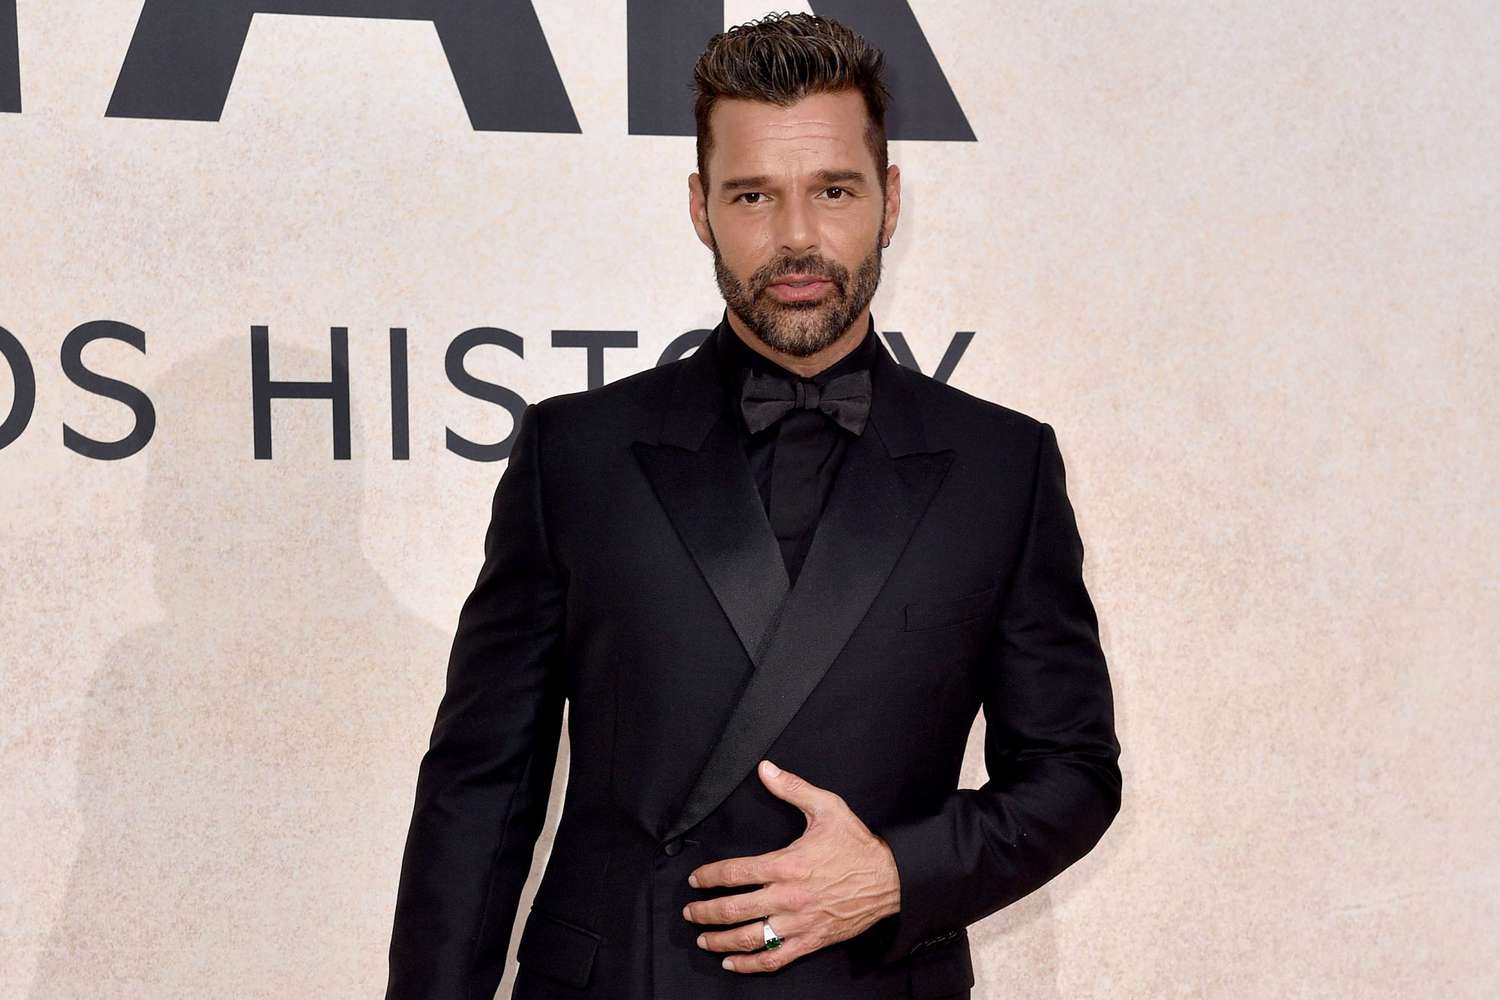 CAP D'ANTIBES, FRANCE - MAY 26: Ricky Martin attends the amfAR Gala Cannes 2022 at Hotel du Cap-Eden-Roc on May 26, 2022 in Cap d'Antibes, France. (Photo by Lionel Hahn/Getty Images)